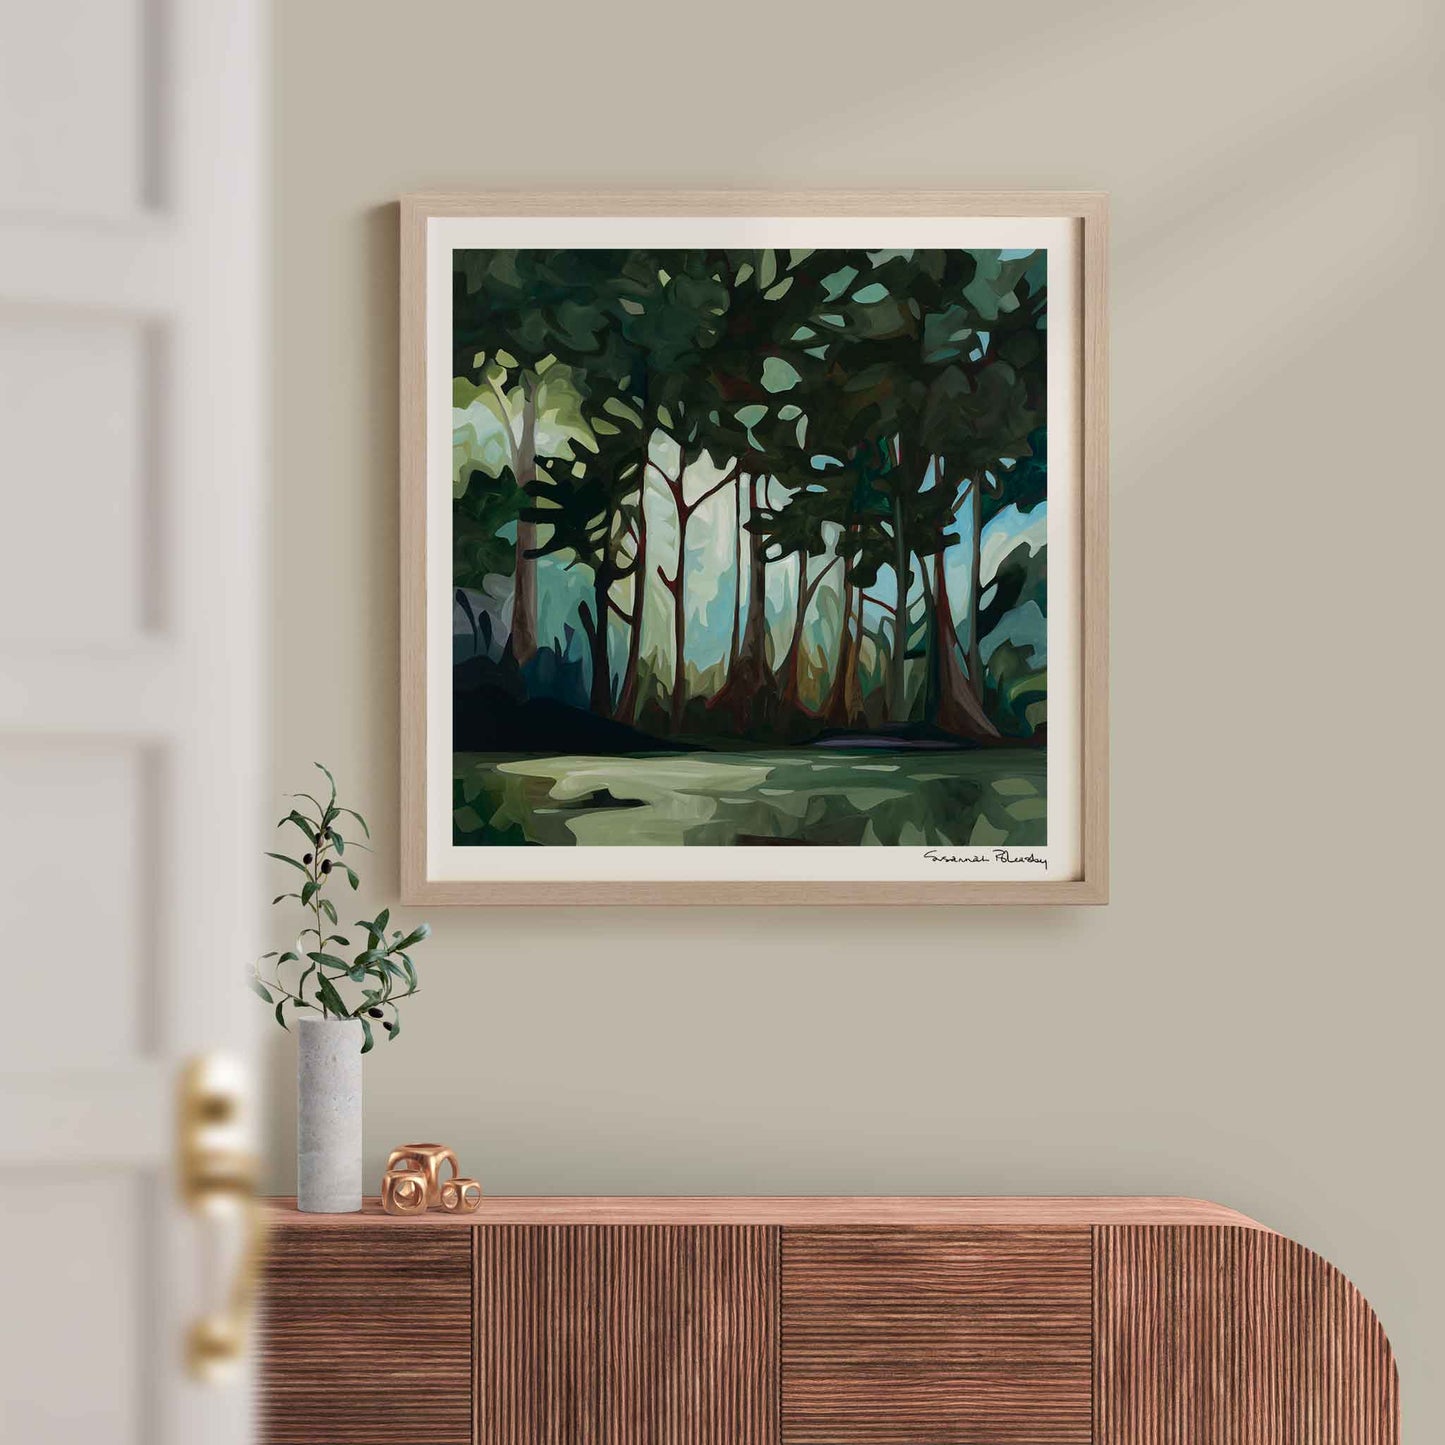 Tanglewood is an abstract forest painting and art print that shows nature's beauty and tranquility.